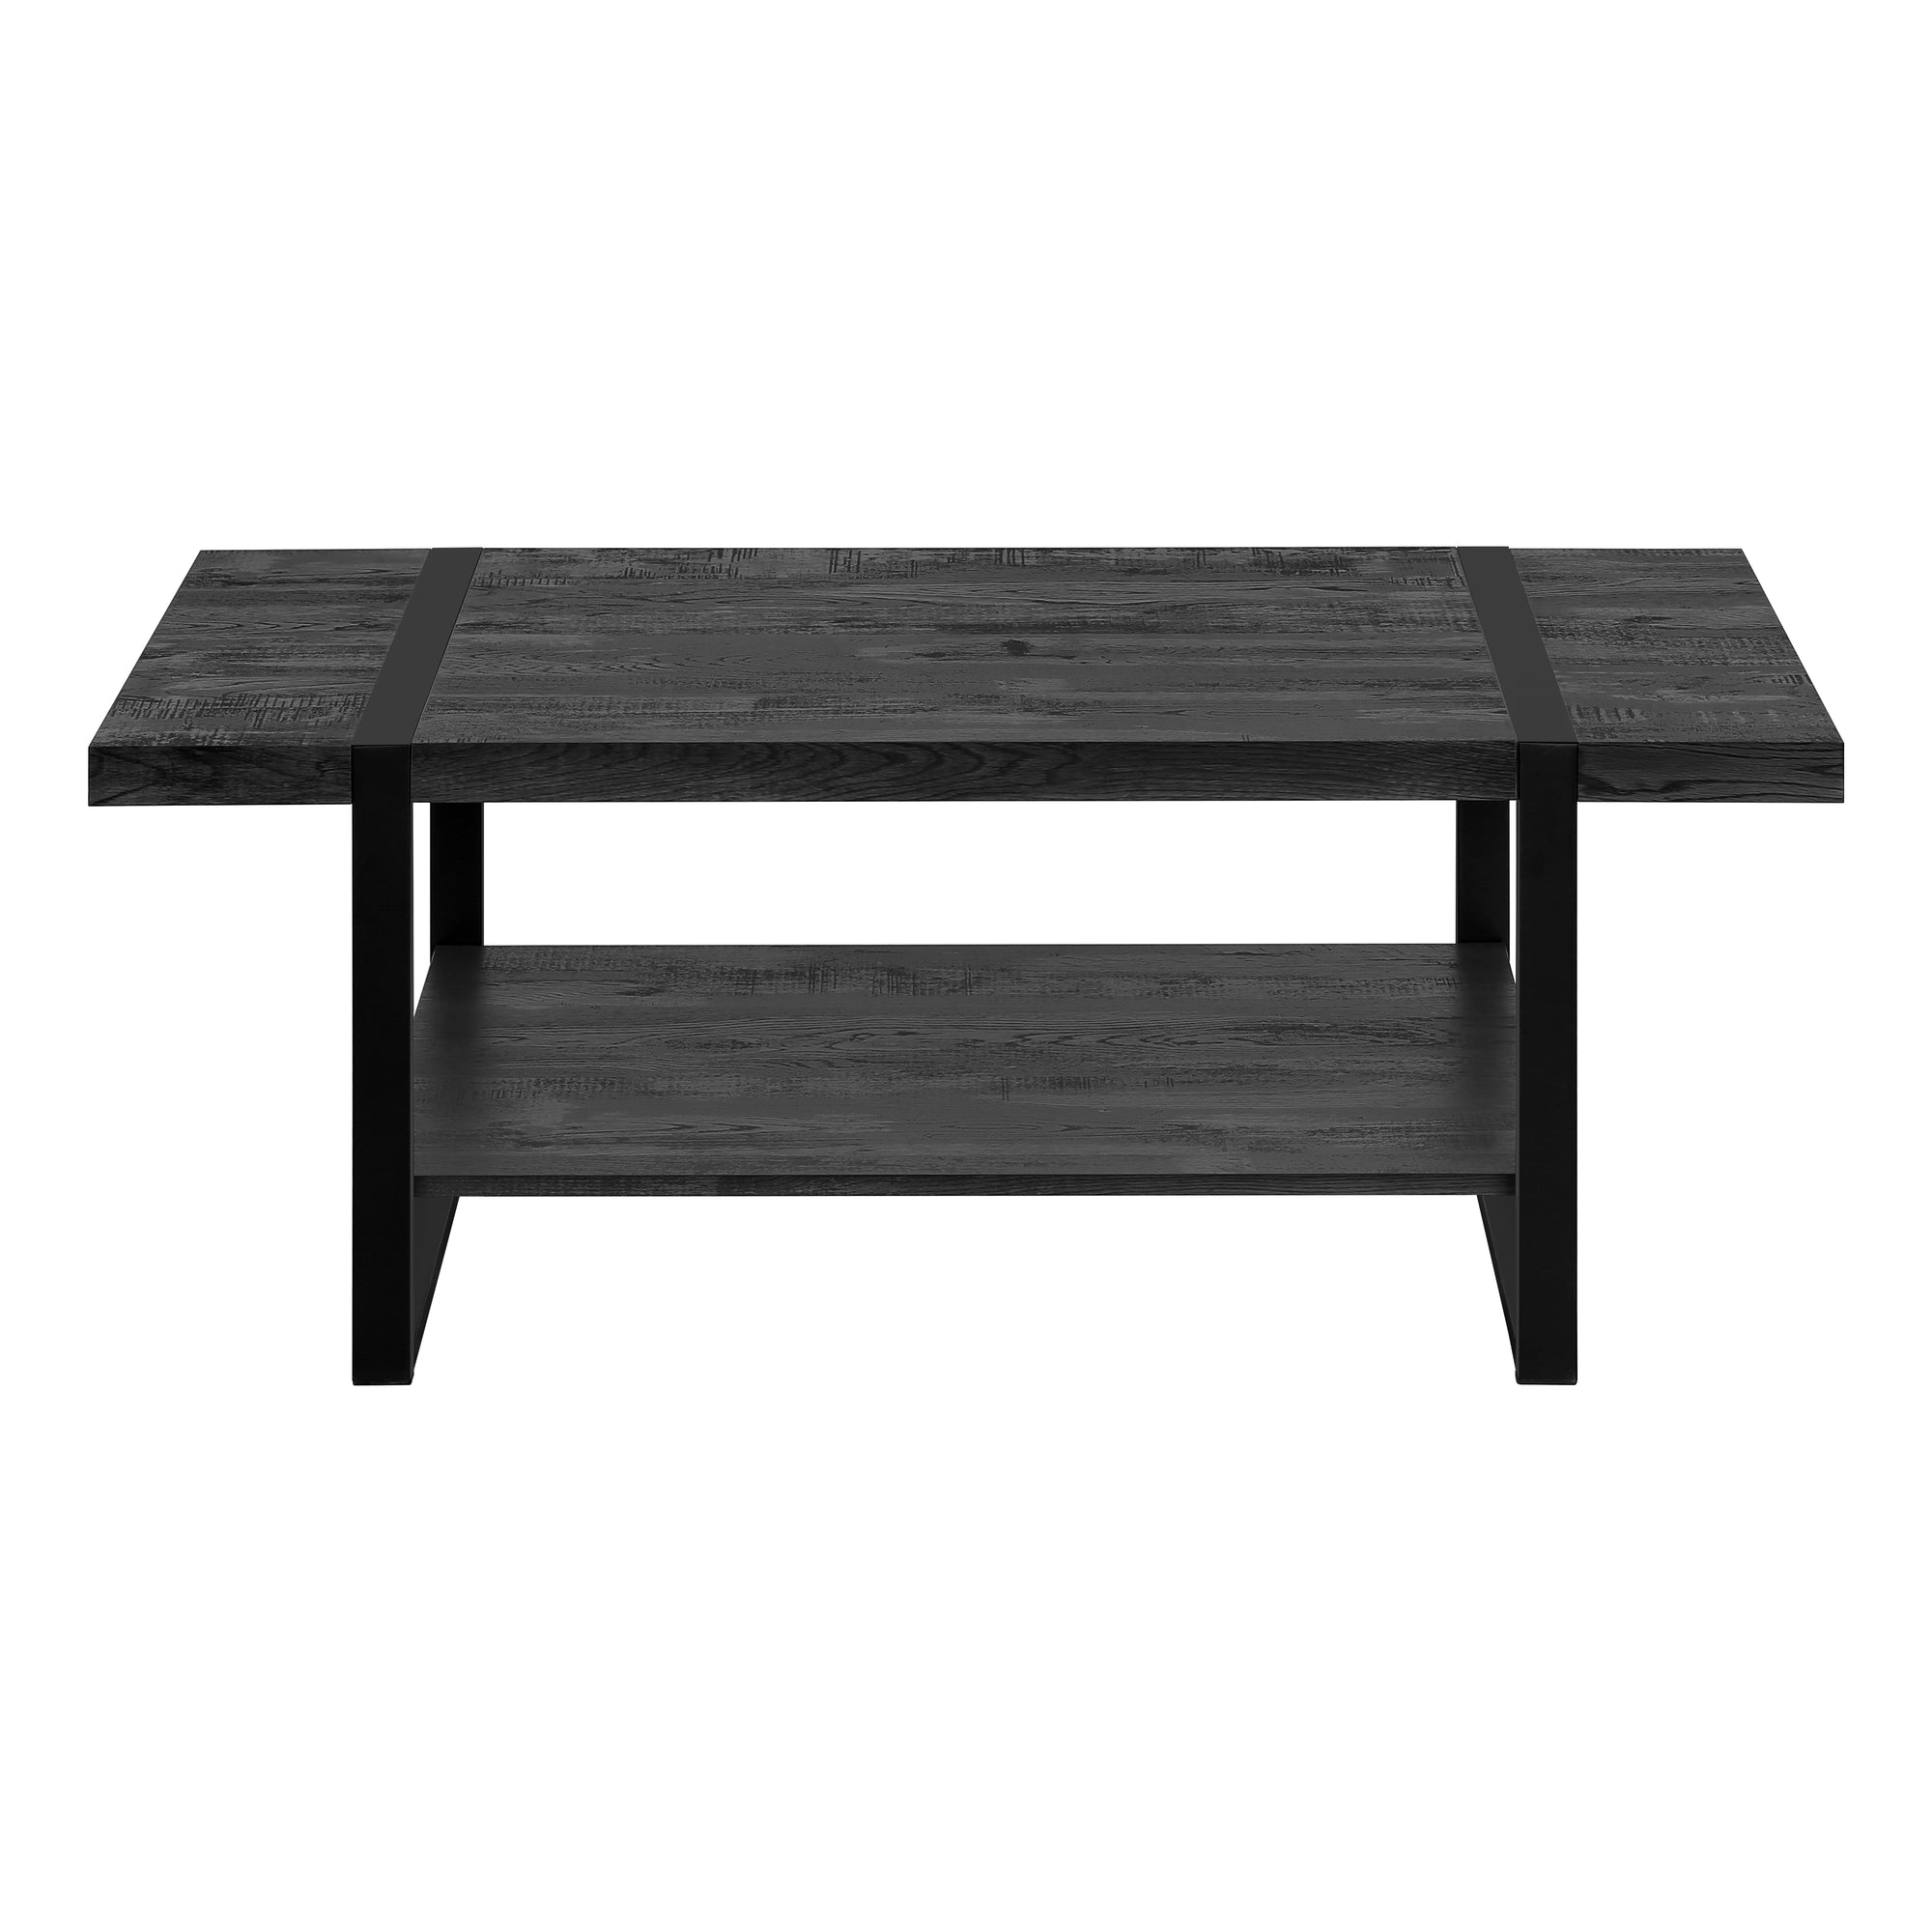 MN-632860    Coffee Table, Accent, Cocktail, Rectangular, Living Room, Metal Frame, Laminate, Black Reclaimed Wood Look, Black, Contemporary, Industrial, Modern